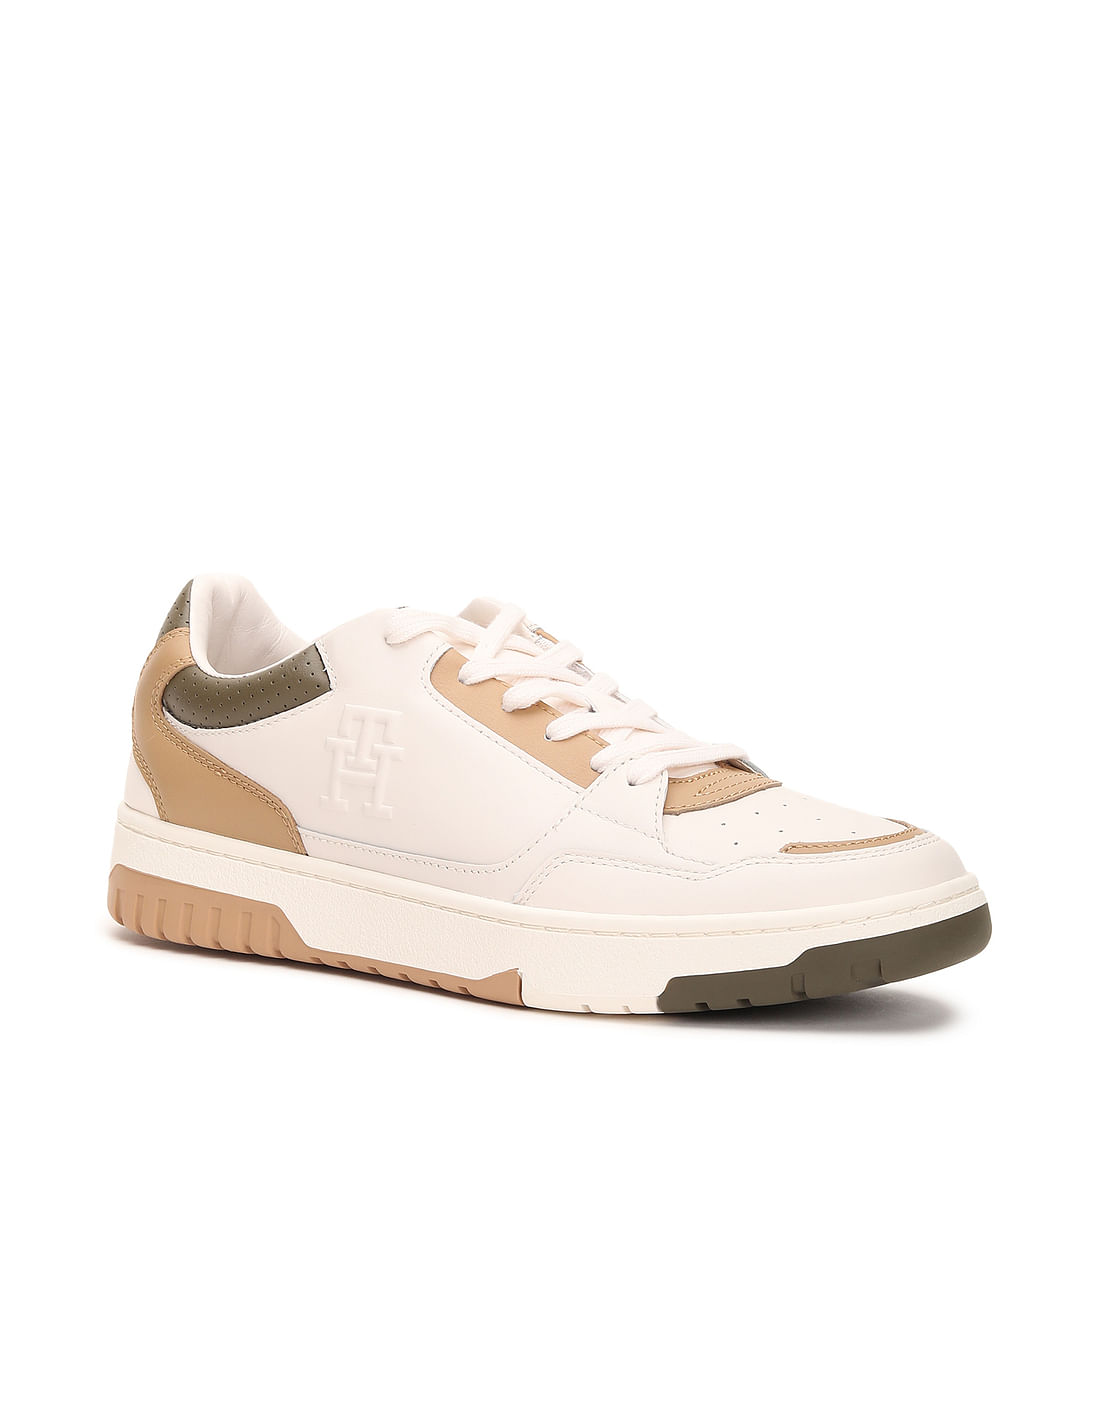 LV Runner Active leather low trainers (LV Runner Active) by LOUIS VUITTON